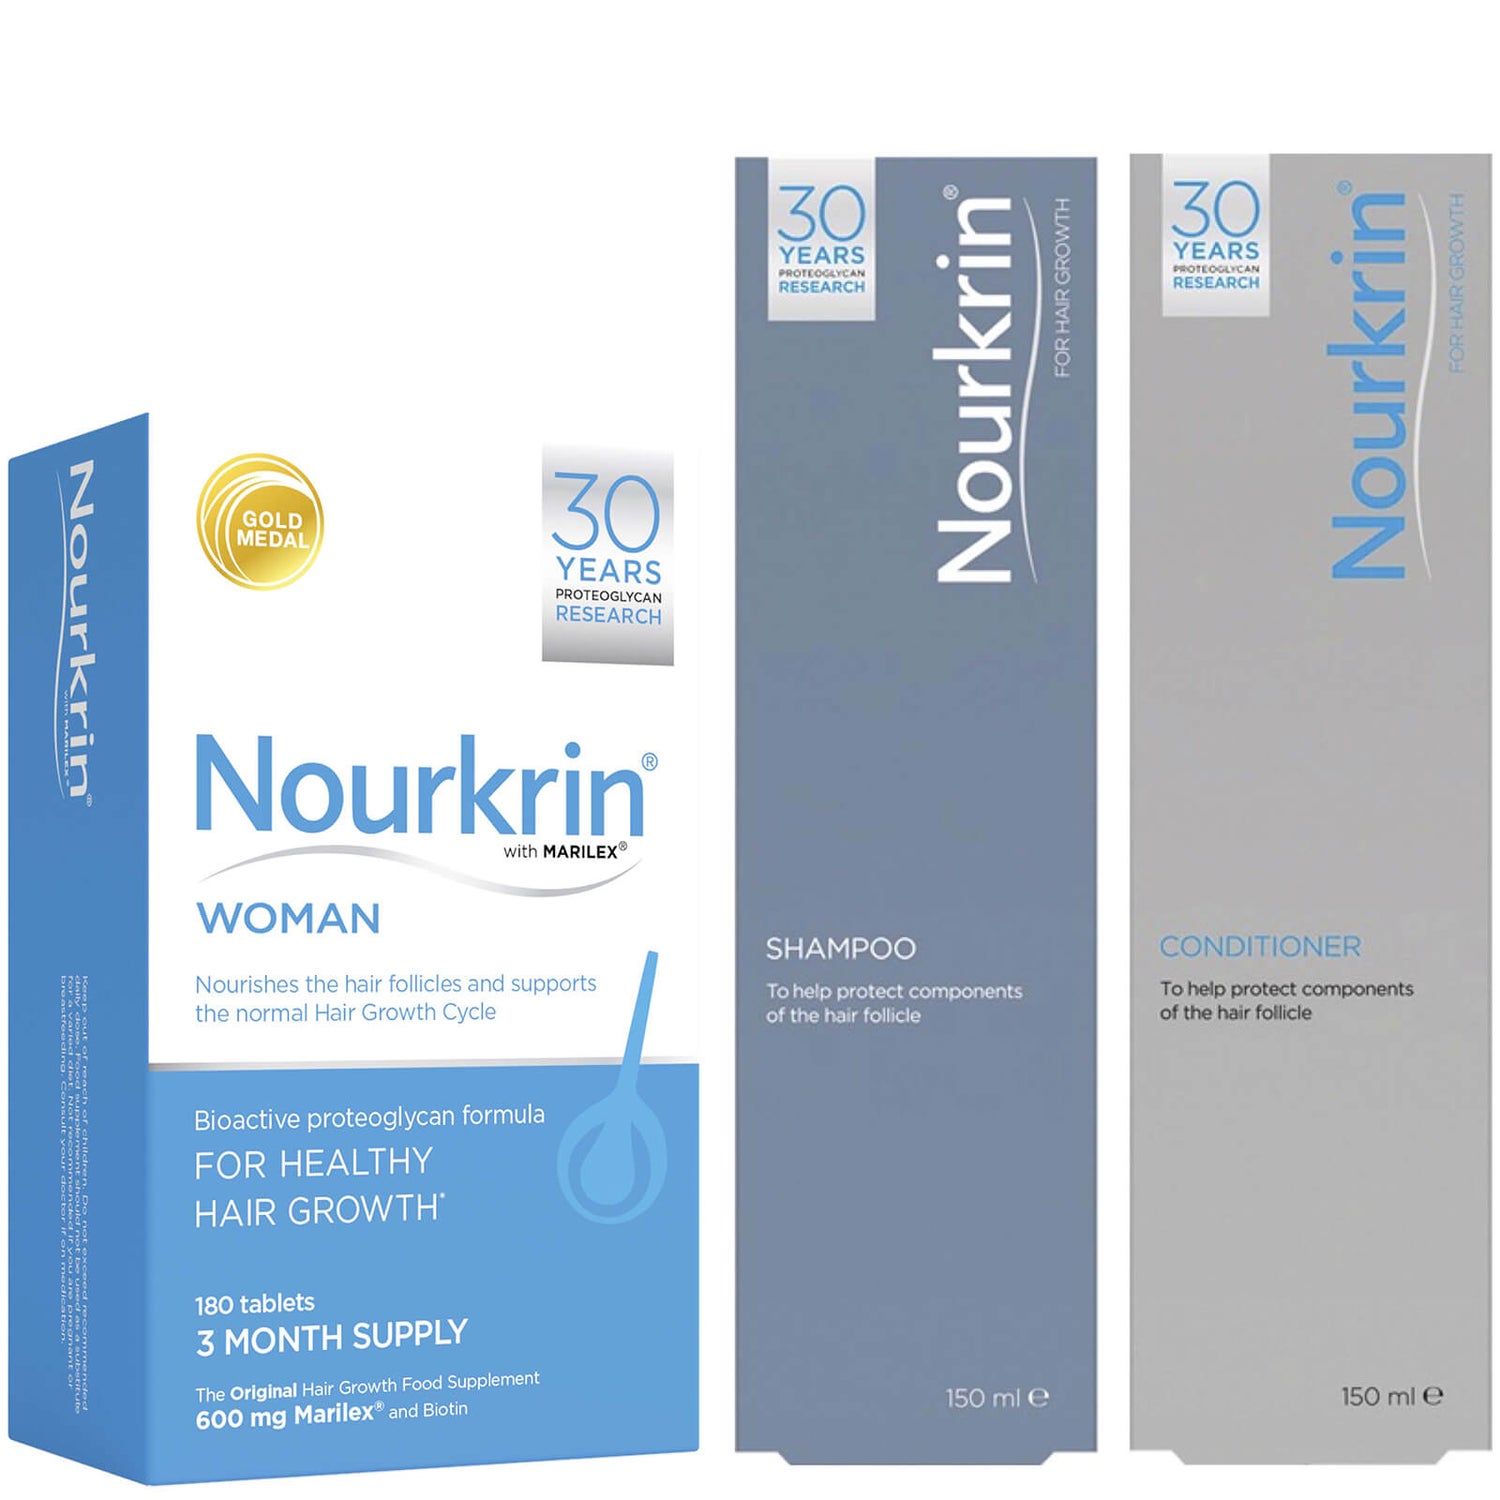 Nourkrin Woman Value Pack - Contains 180 Tablets Plus FREE Shampoo and Conditioner (2x150 ml)